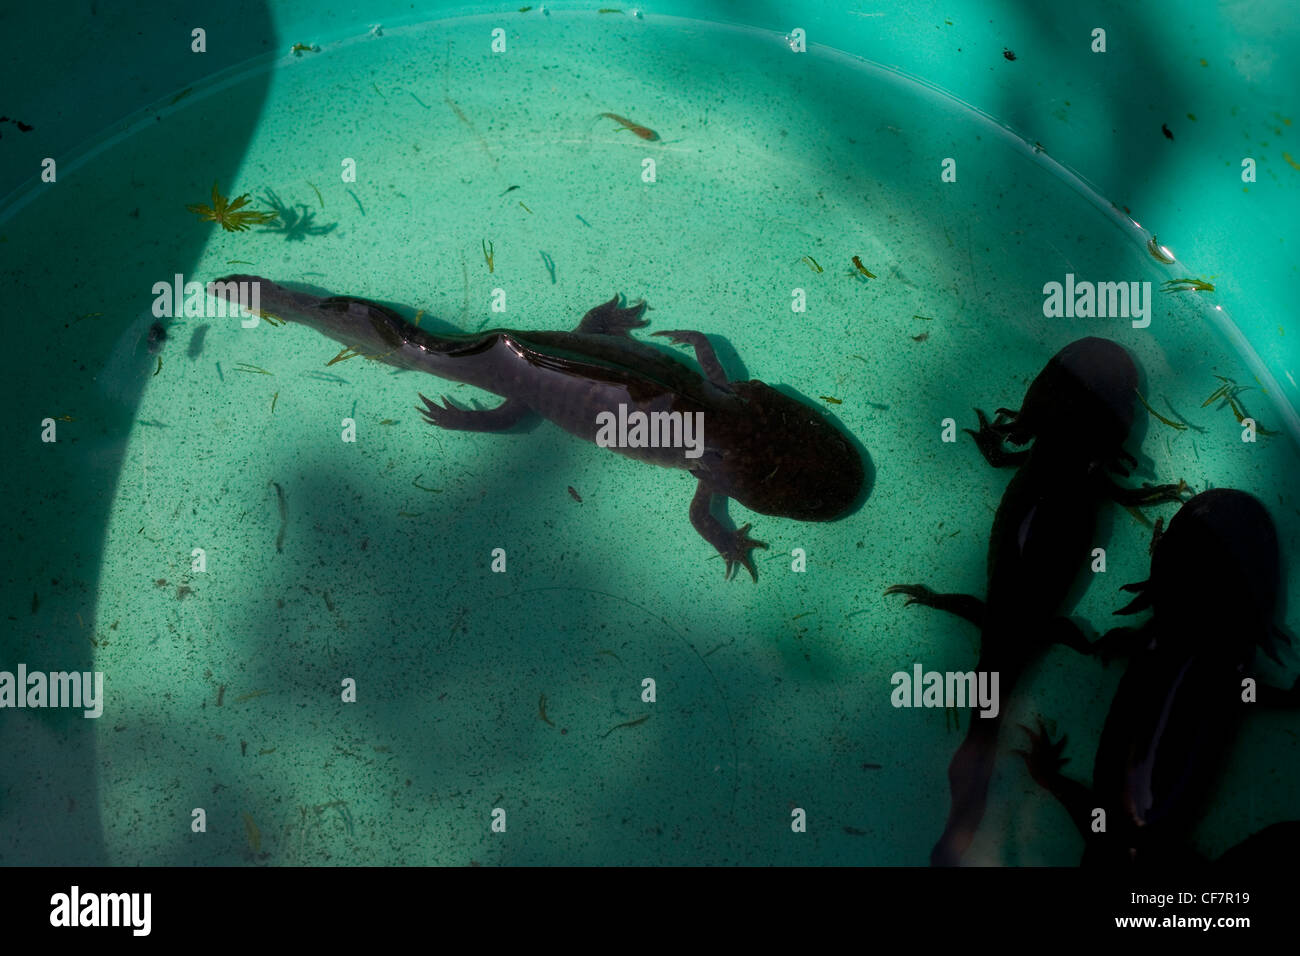 Axolotls or ajolotes, ambystoma mexicanum, a type of salamander swims in a fish tank in Xochimilco, Mexico City. Stock Photo